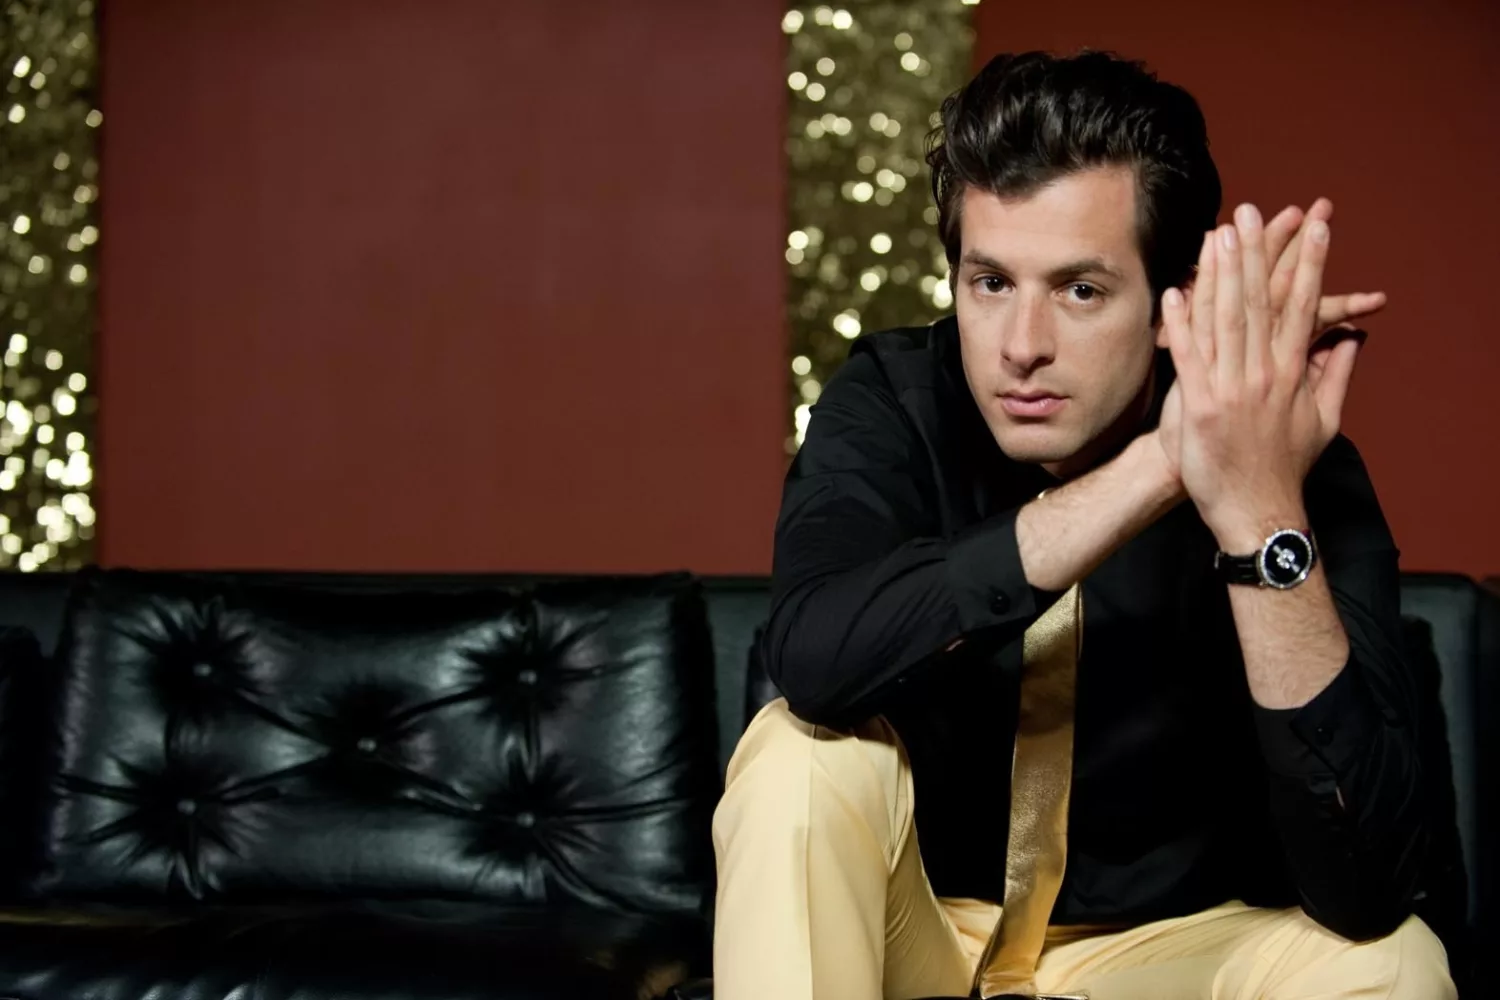 Mark Ronson shares more of new album 'Late Night Feelings' with YEBBA featuring single 'Don't Leave Me Lonely'